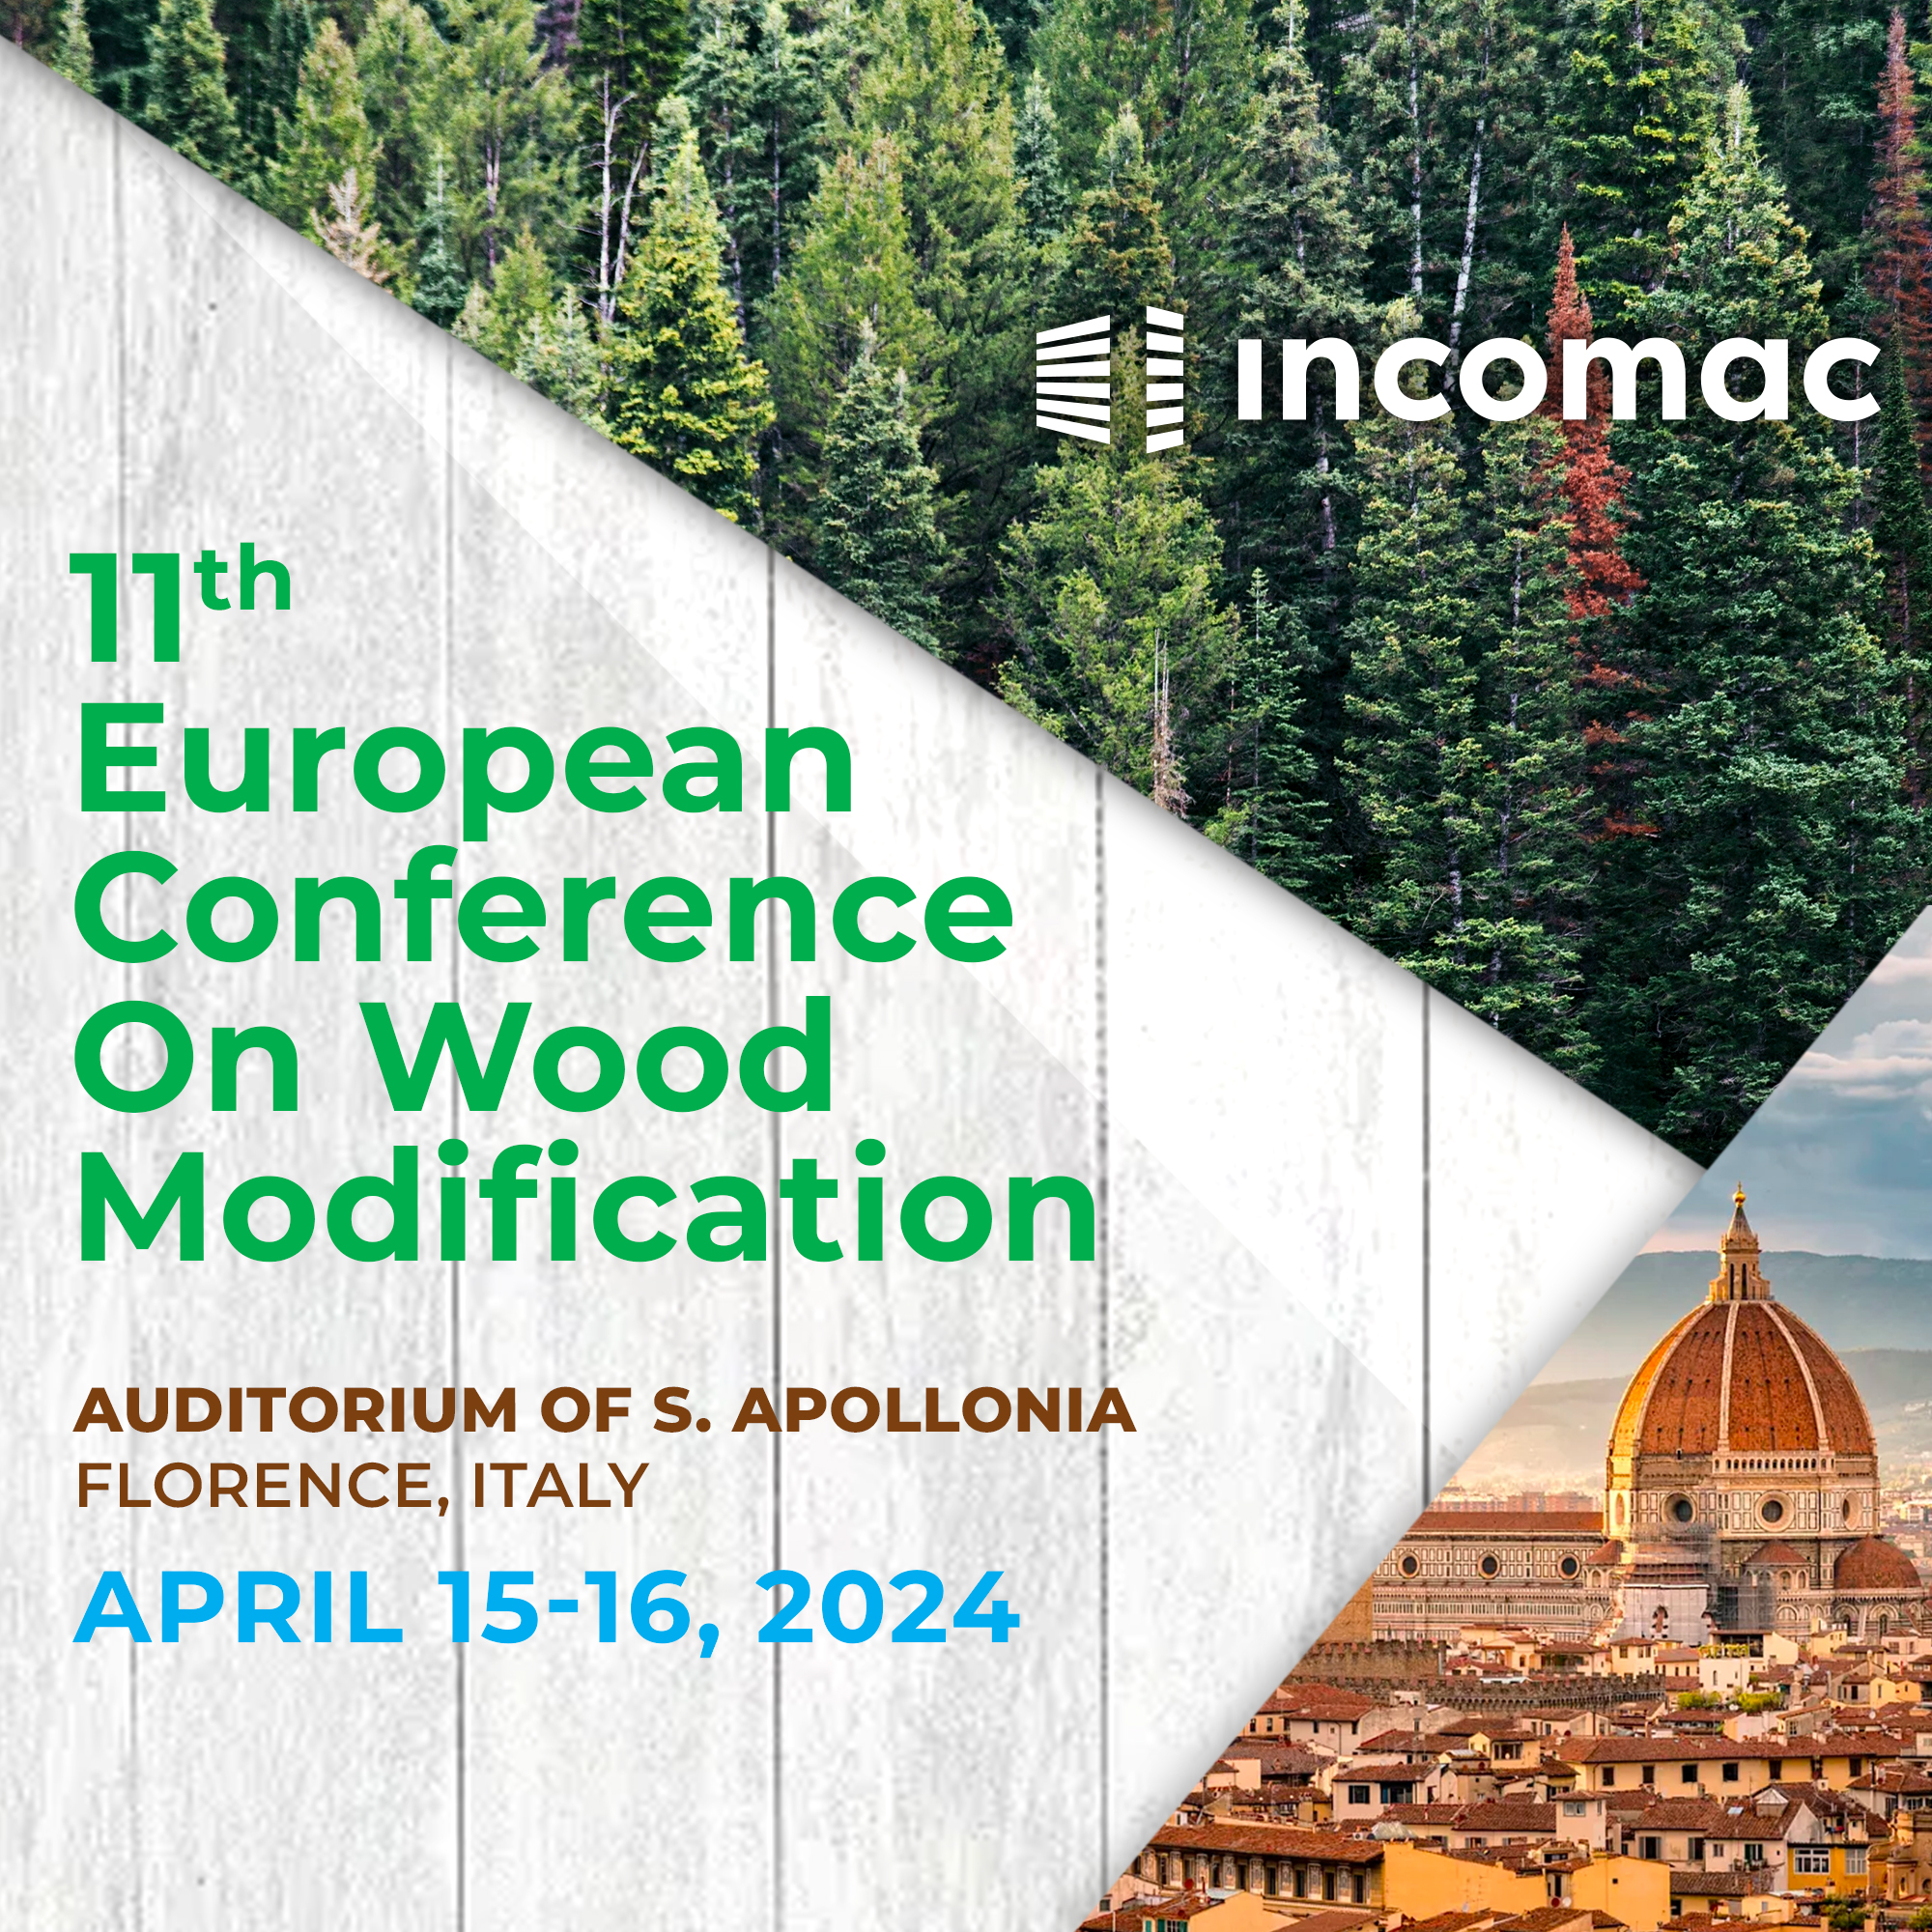 European Conference on Wood Modification